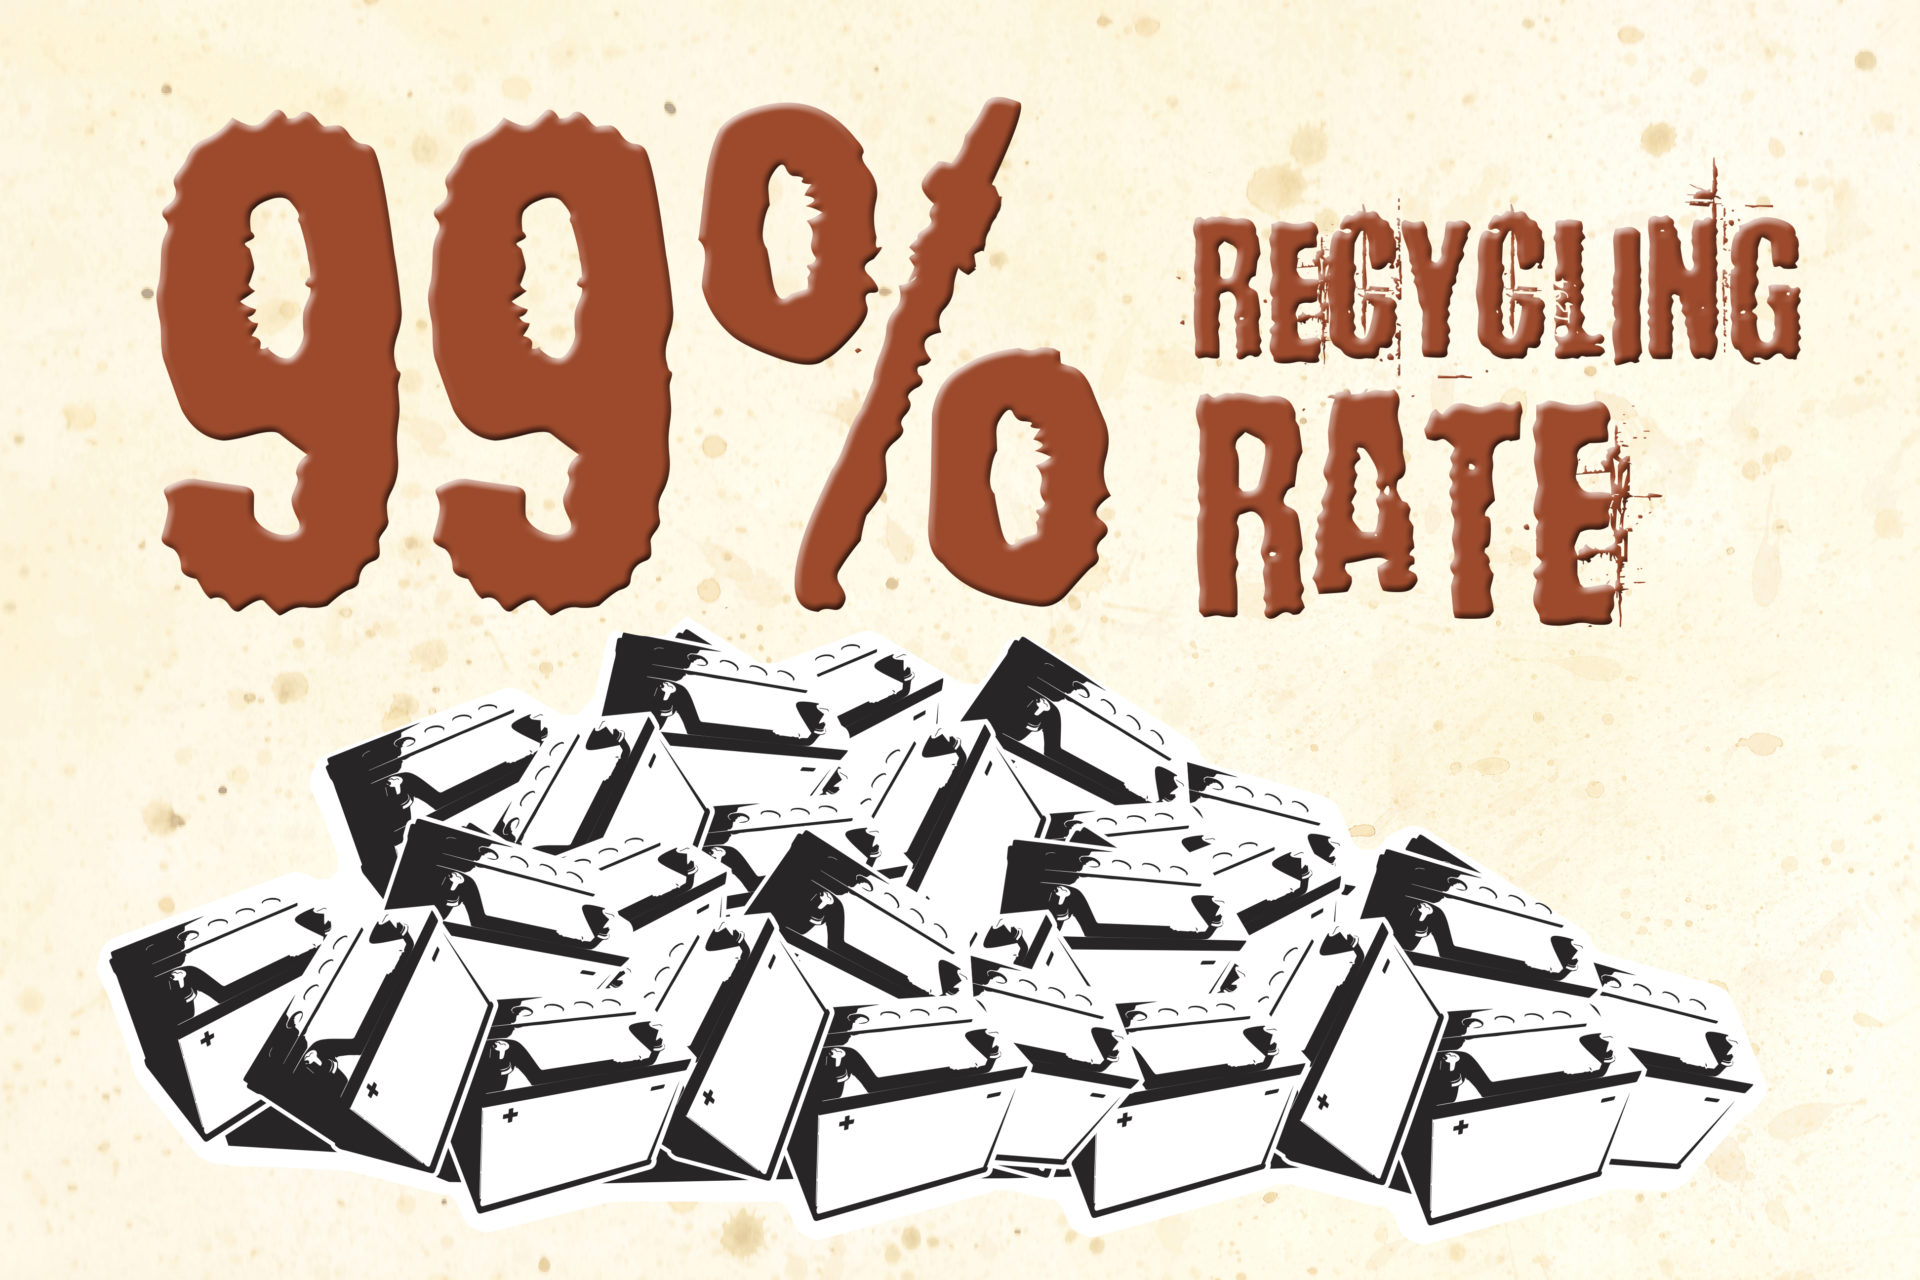 battery recycling 99 percent